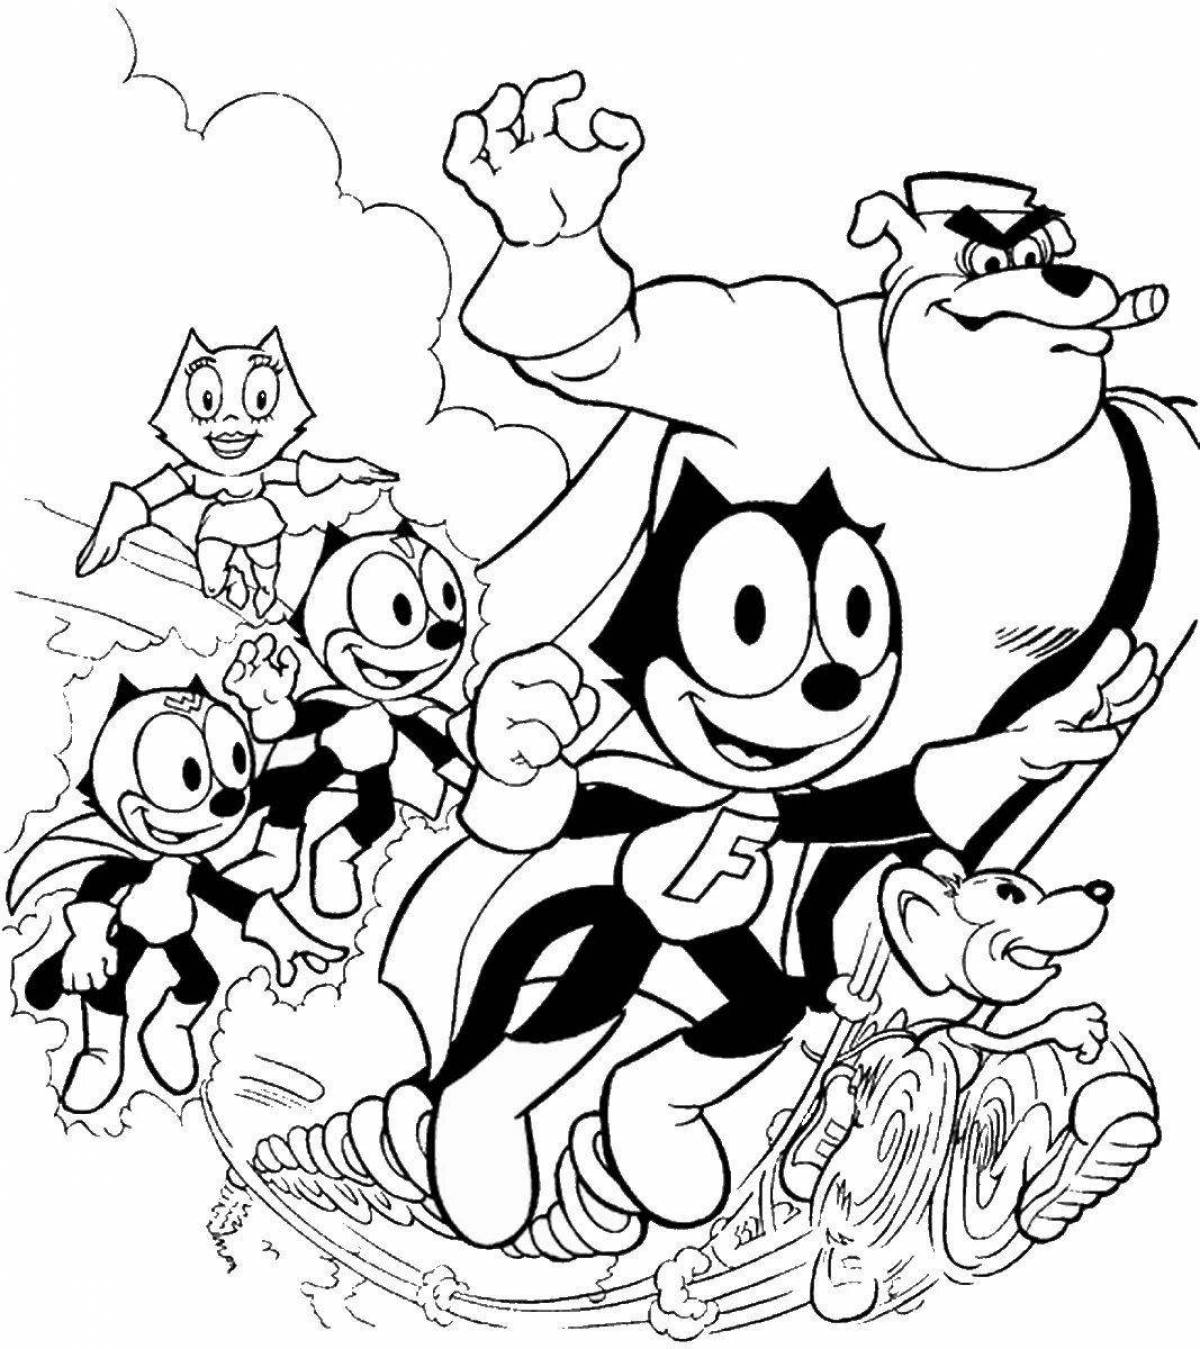 Outstanding cartoon cat coloring book for kids